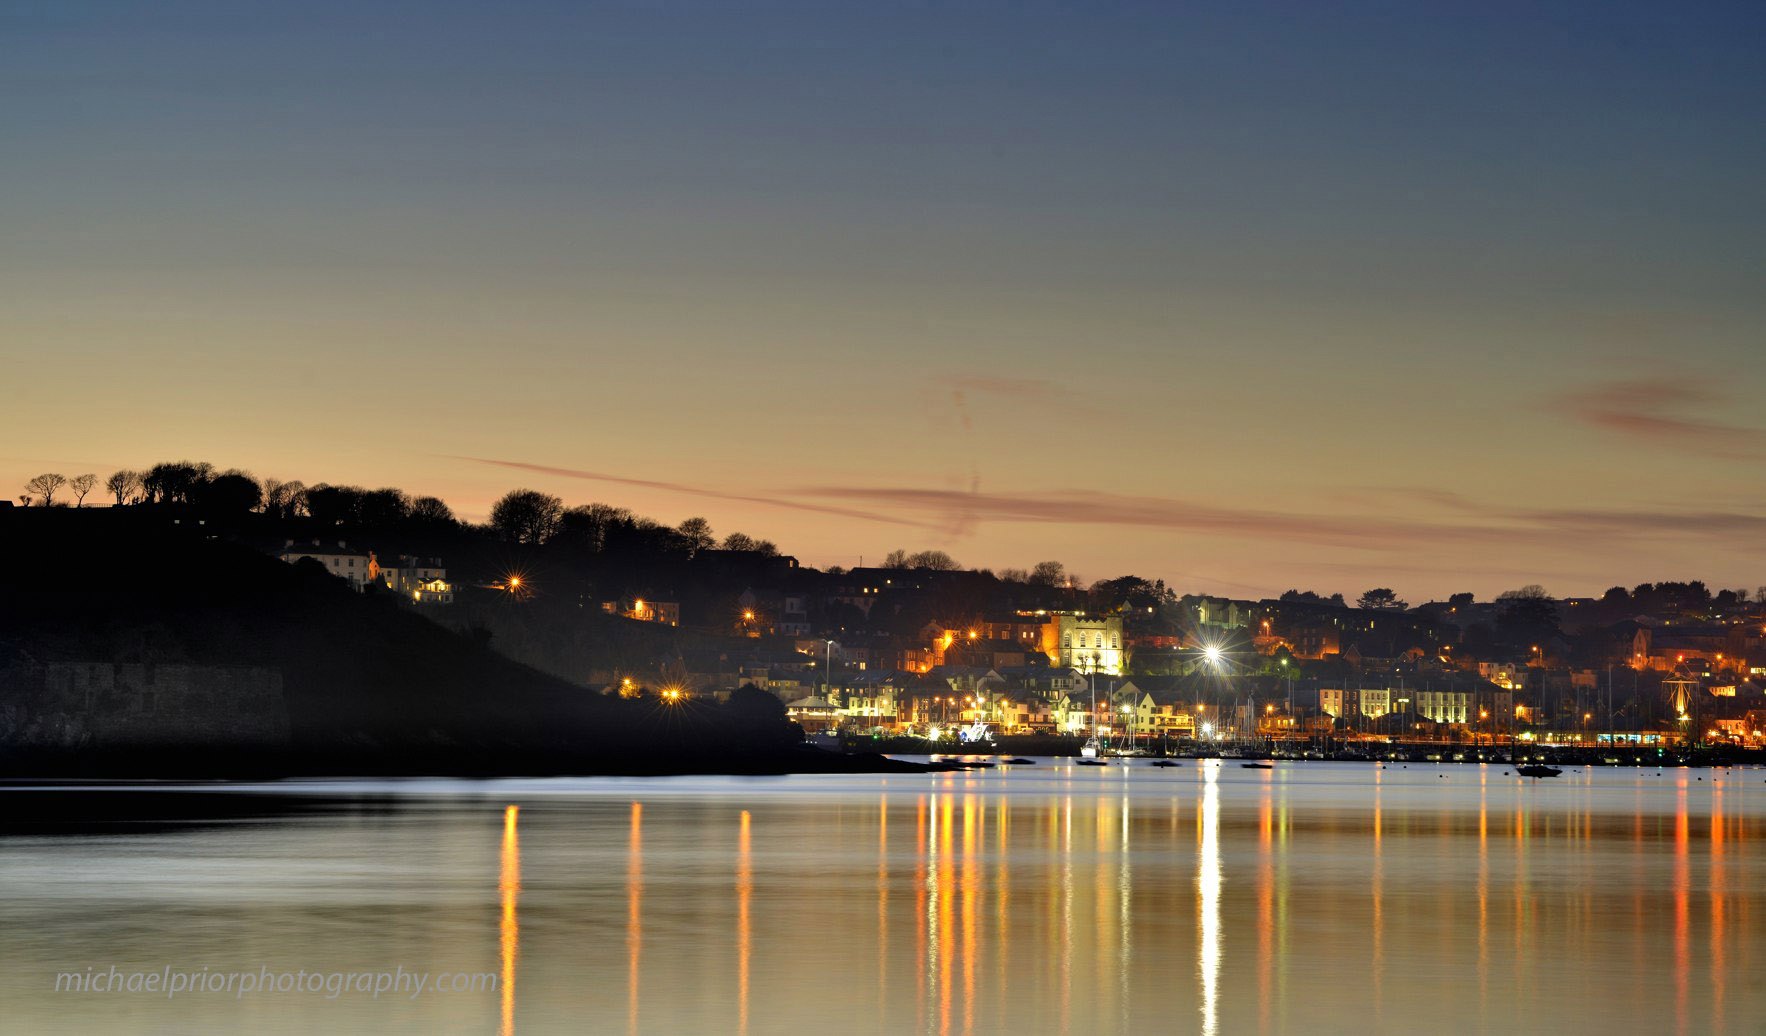 Sunset At Kinsale - Michael Prior Photography 